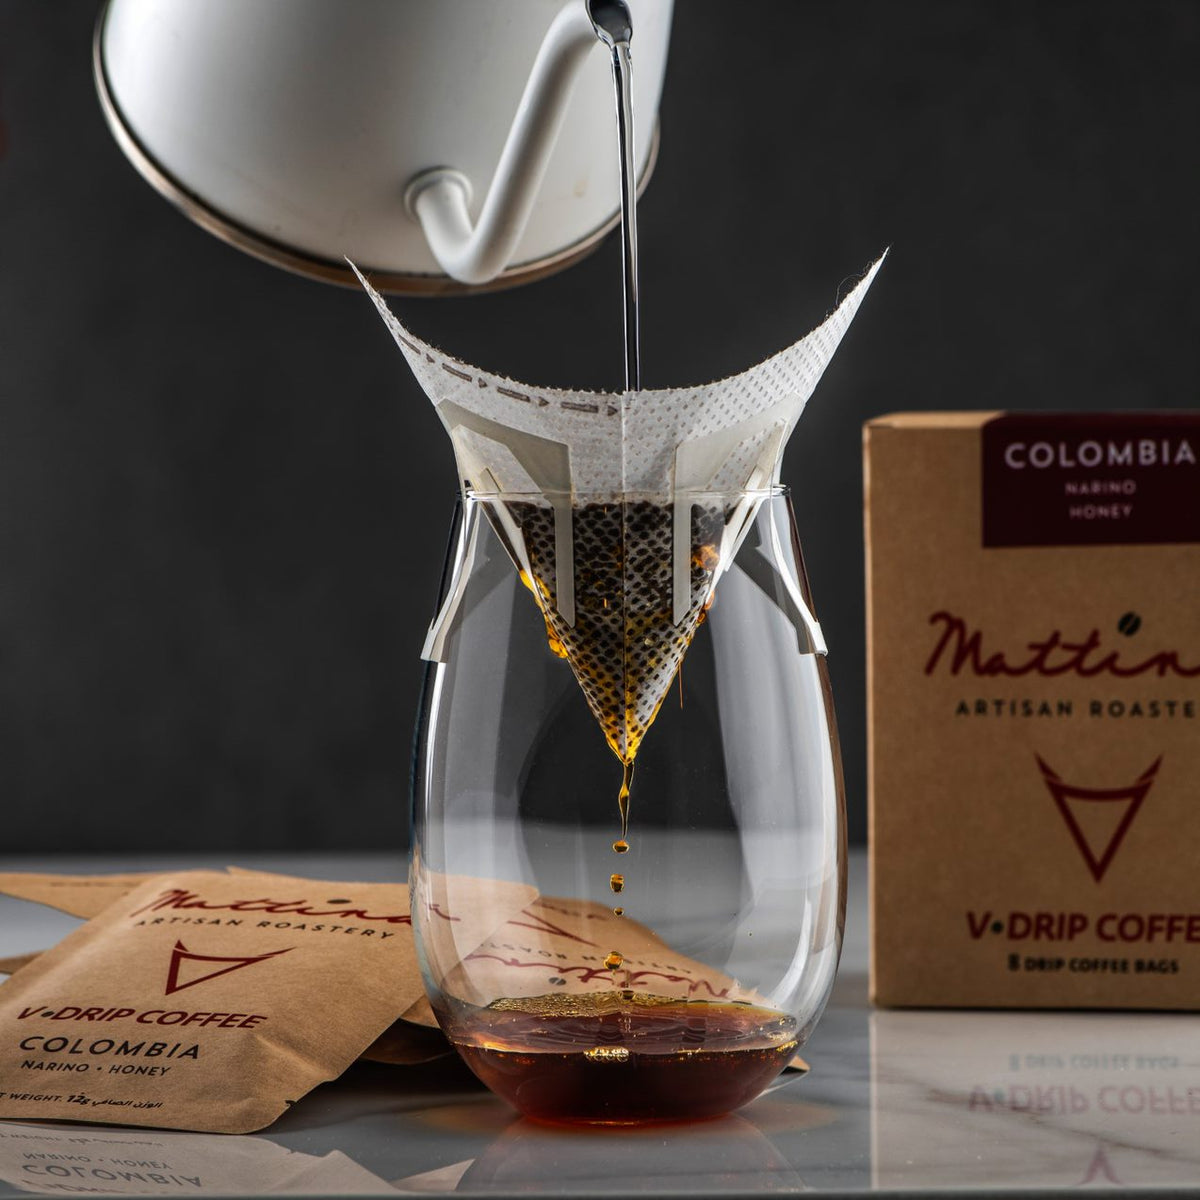 V-DRIP coffee bags single serve filter coffee bags Quality and Convenience Combined into One